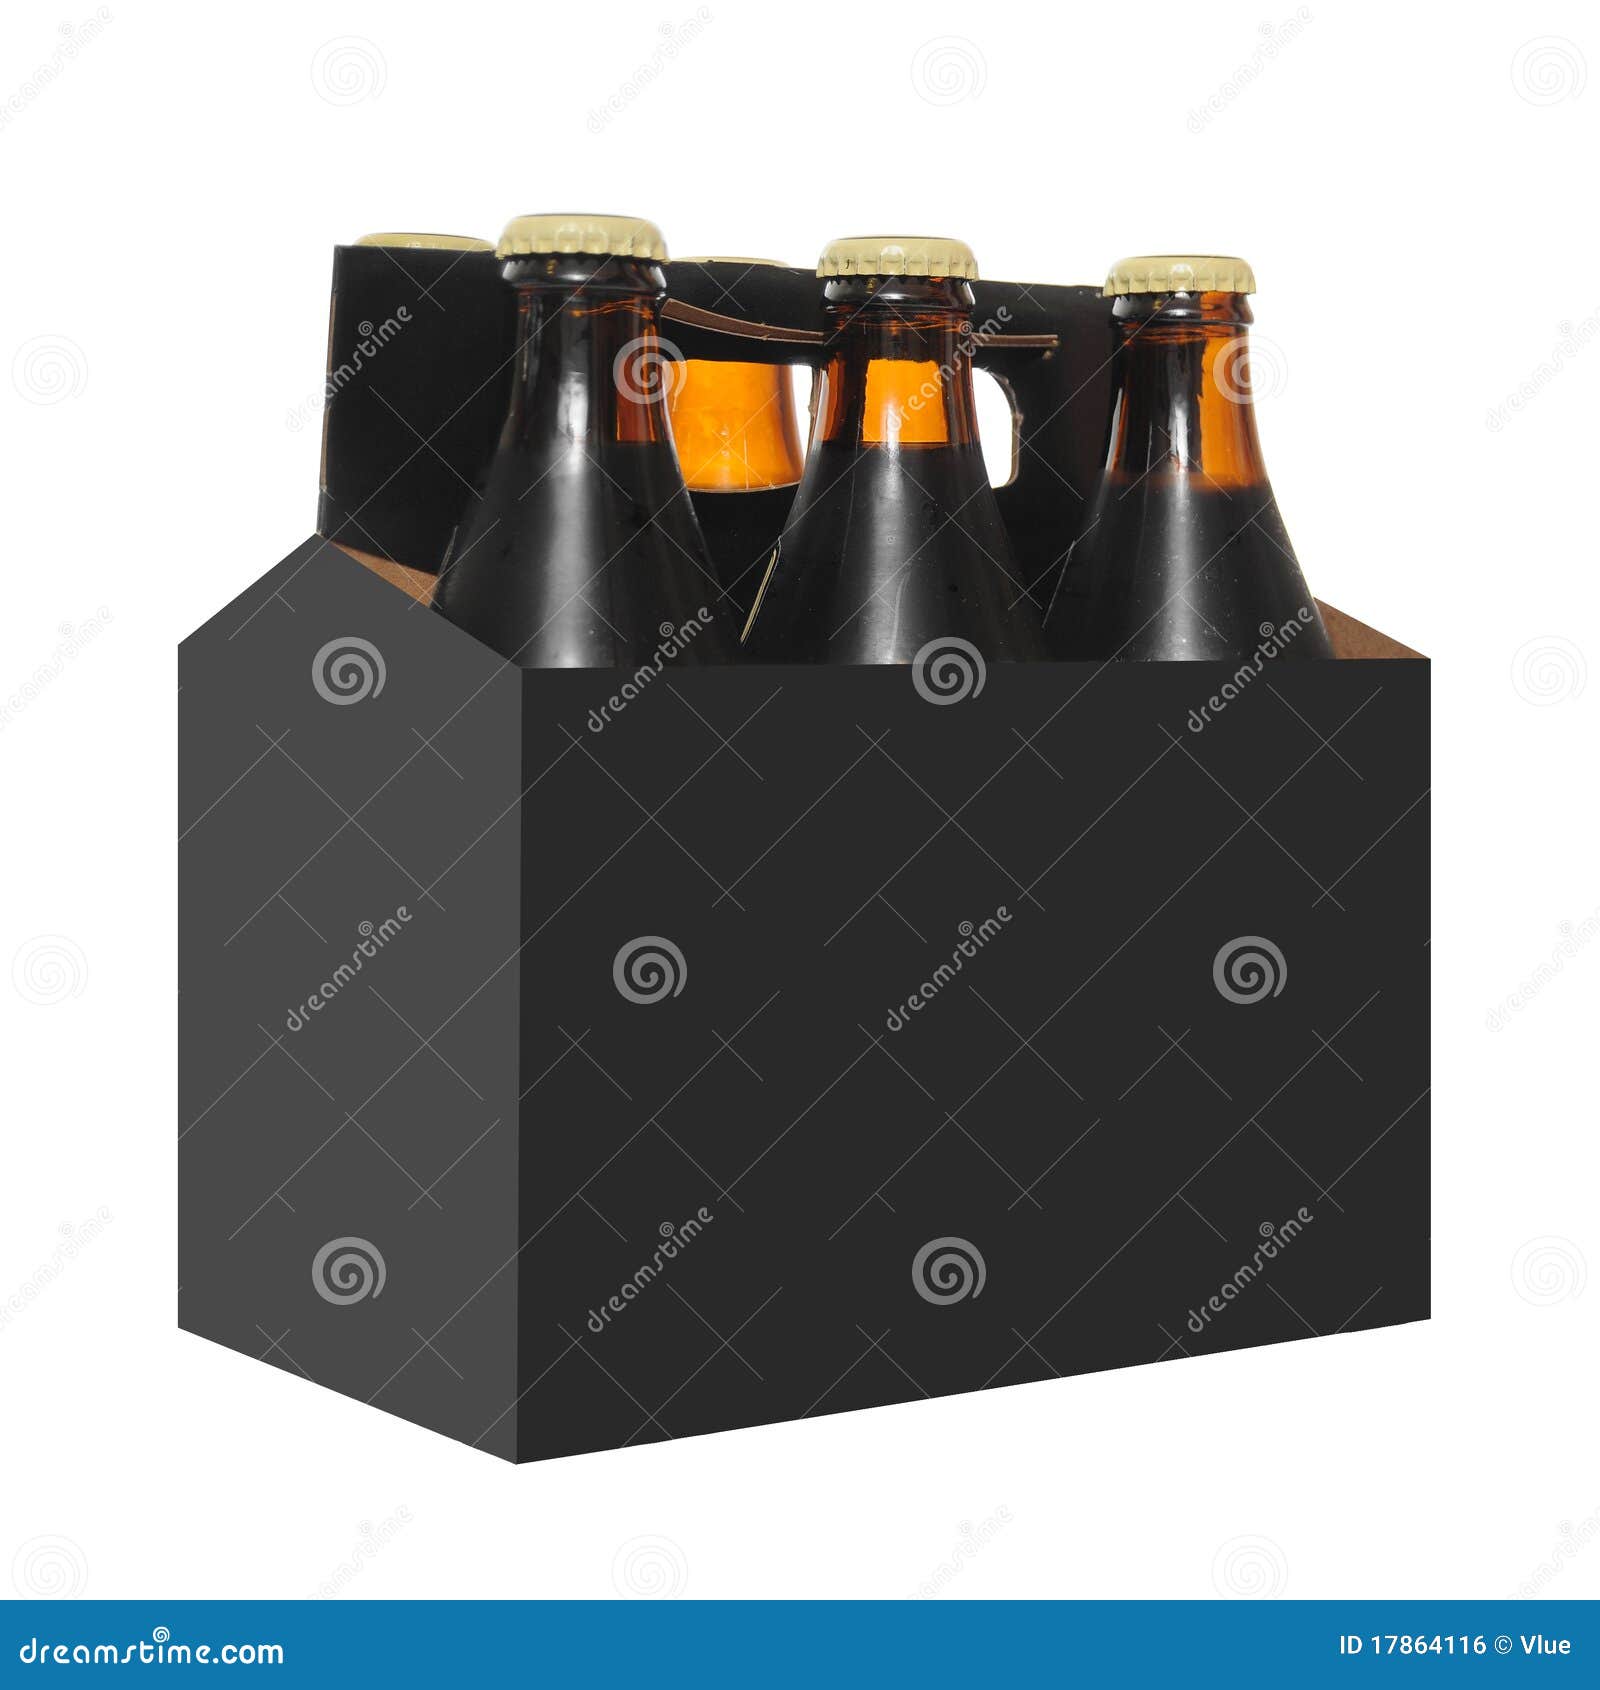 Download 211 Six Pack Beer Bottles Photos Free Royalty Free Stock Photos From Dreamstime